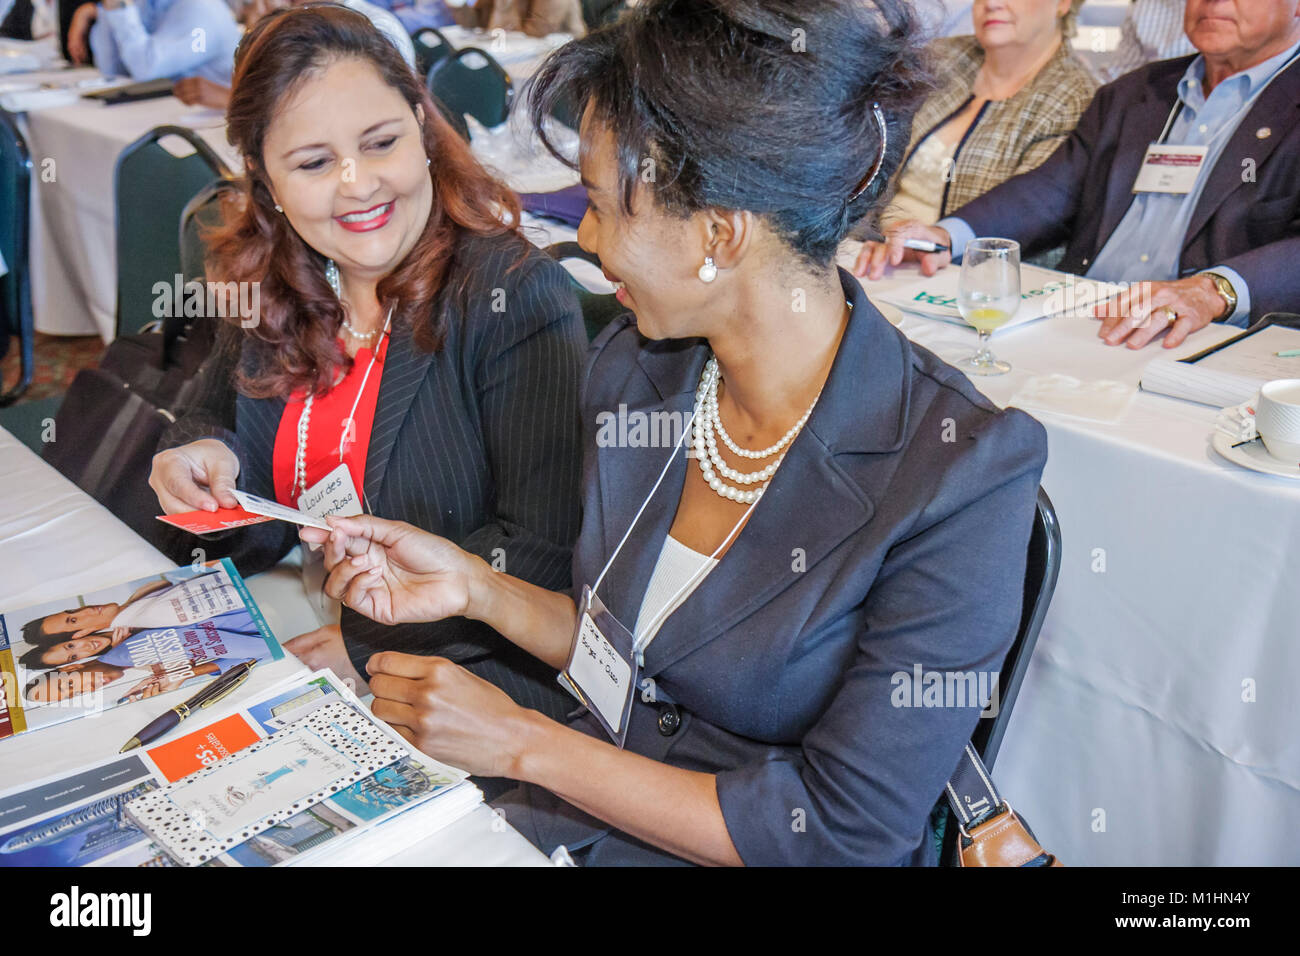 Miami Florida,Jungle Island,Small business,Training and Matchmaking Summit,working,work,servers employee employees worker workers job jobs staff,caree Stock Photo